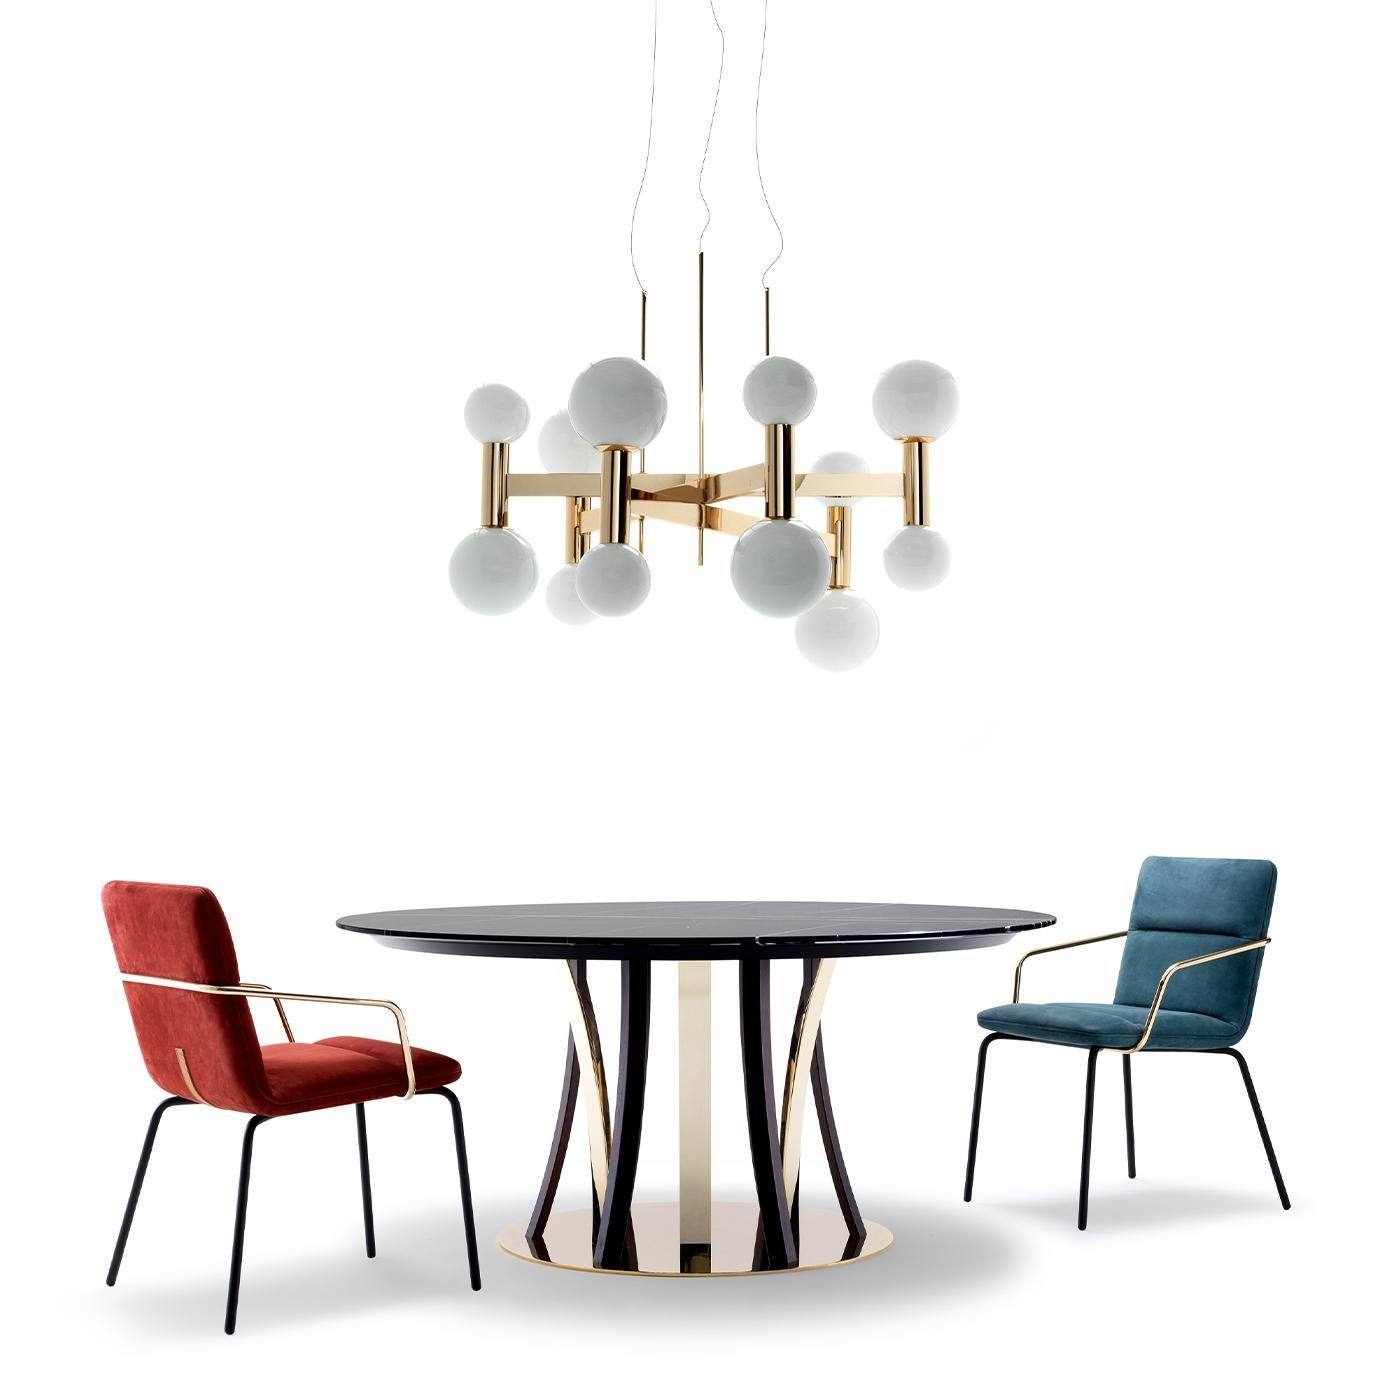 A sculptural objet d'art, this splendid dining table is a unique design by Castello Lagravinese Studio. Boasting a captivating interplay of refined materials, it is composed of dark American walnut and satin brass-finished metal legs interacting in